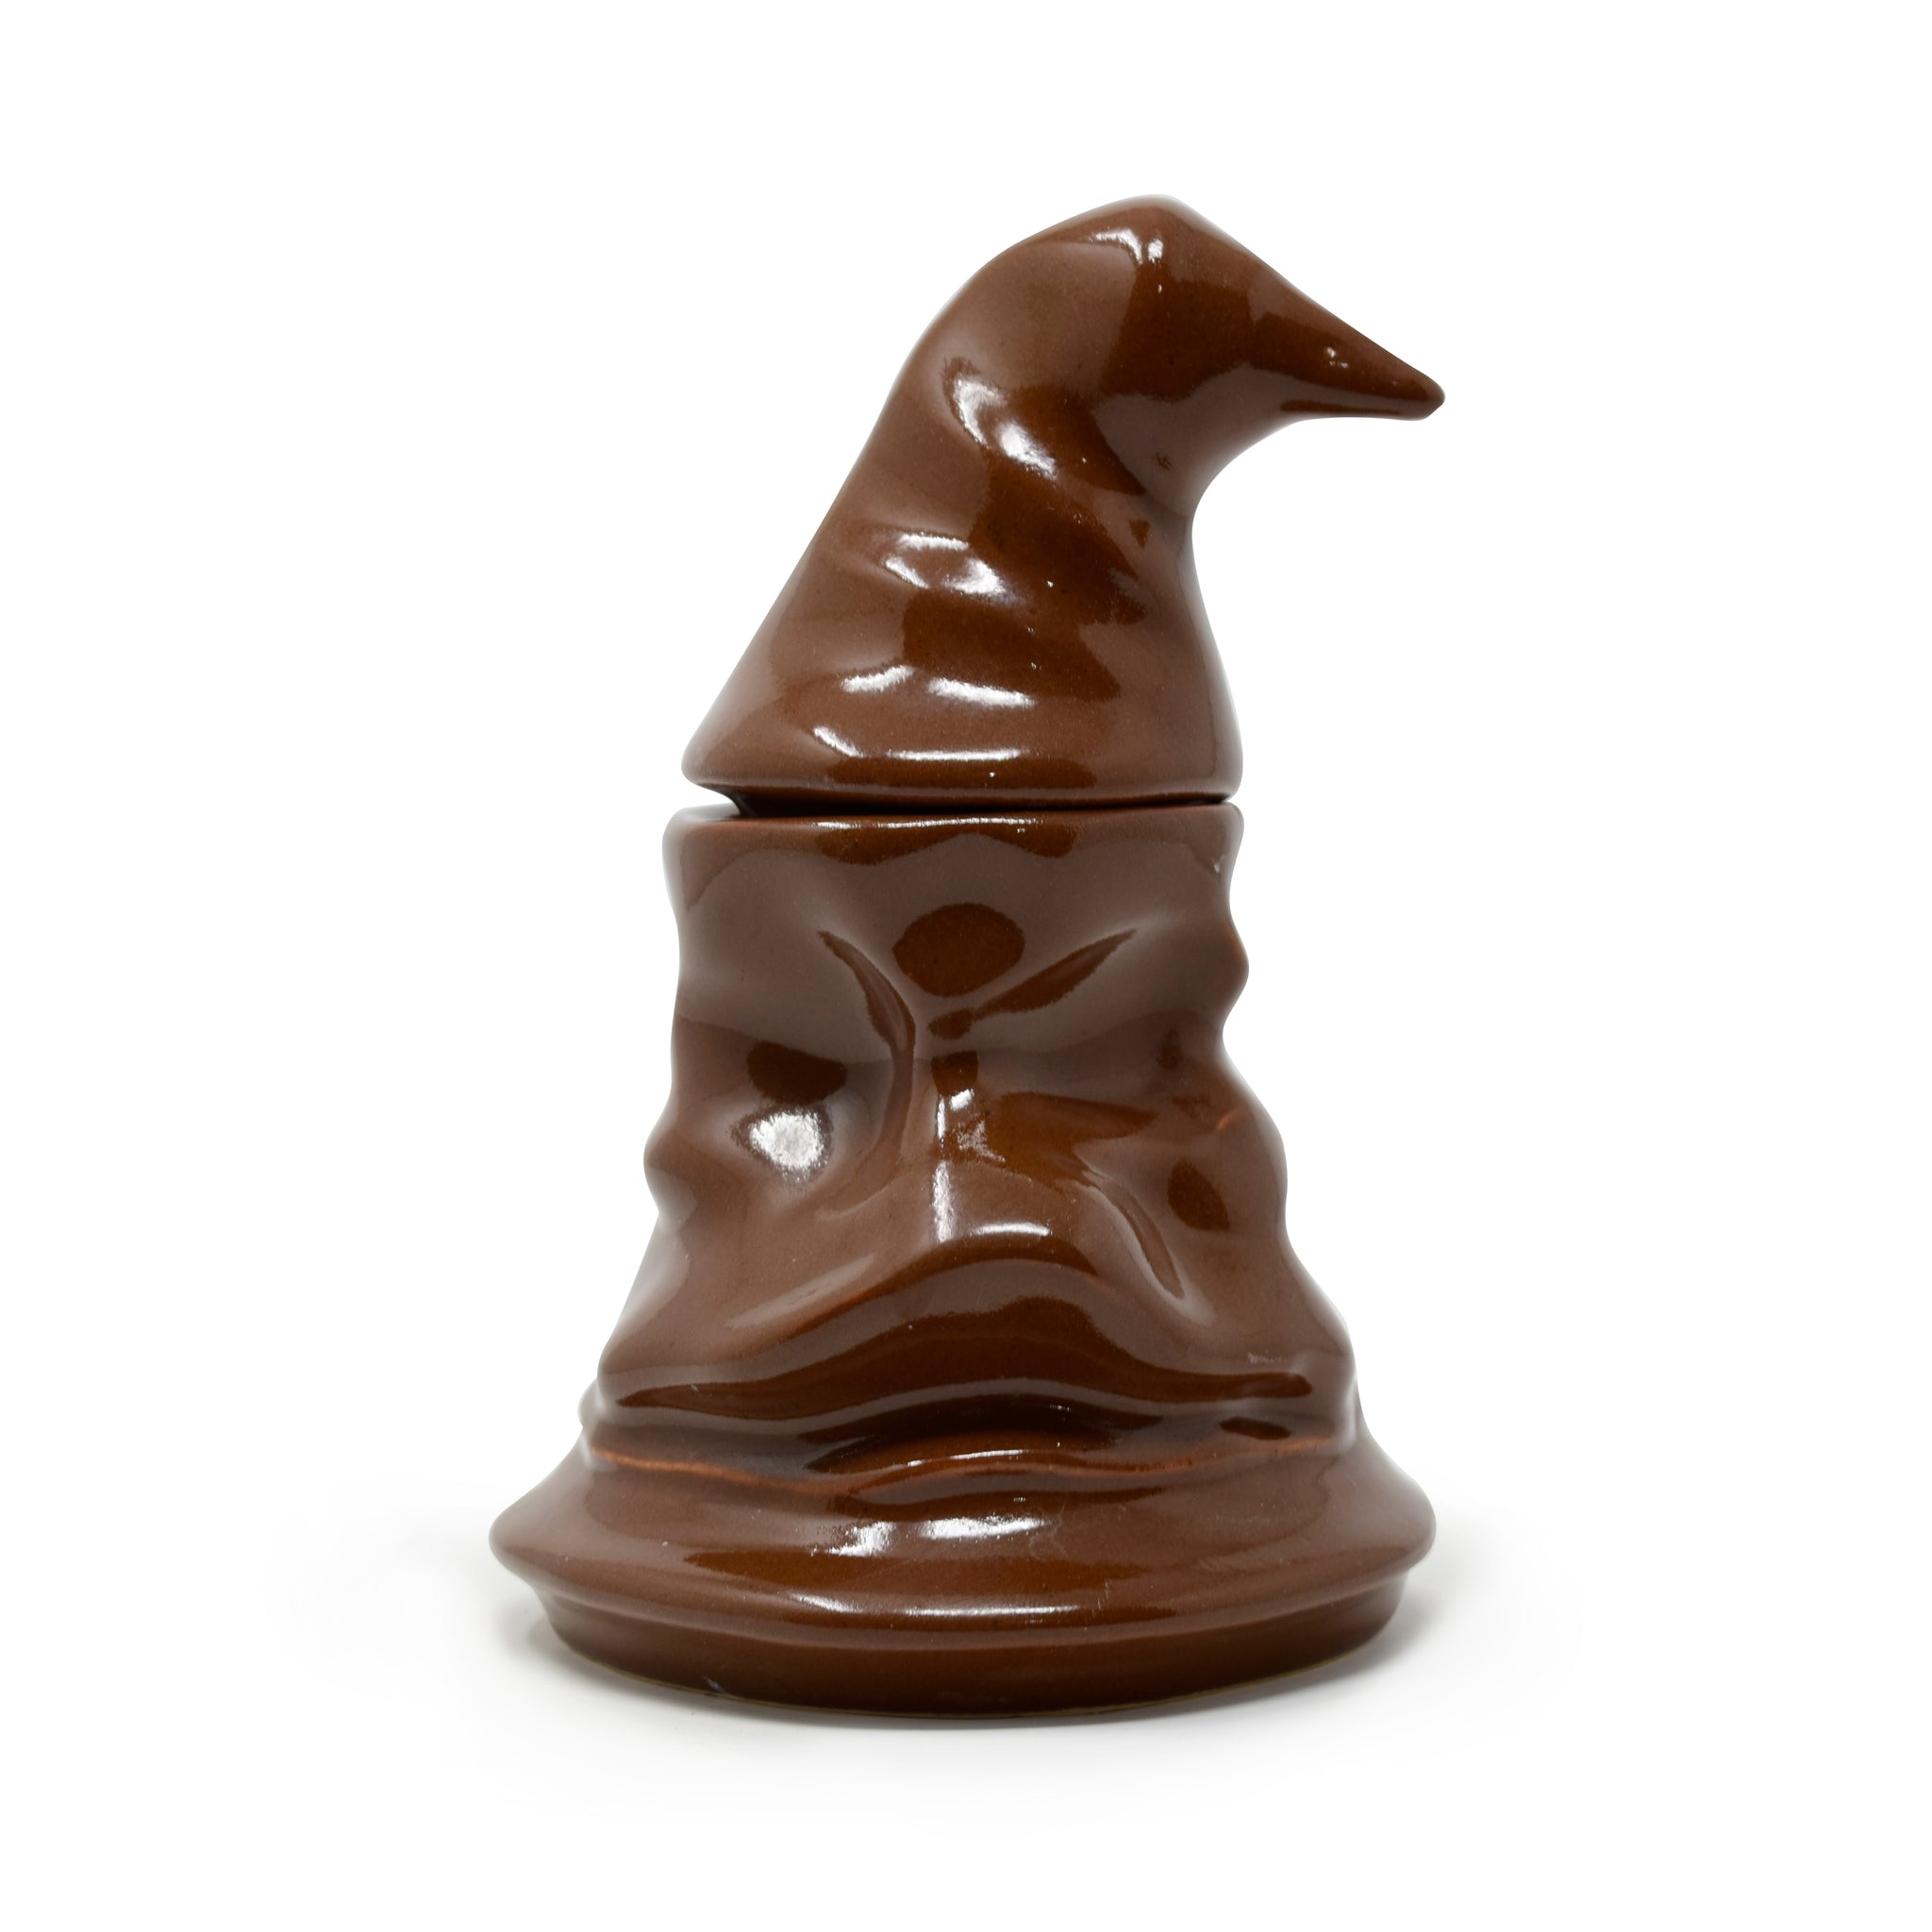 Harry Potter Sorting Hat Shape Cup